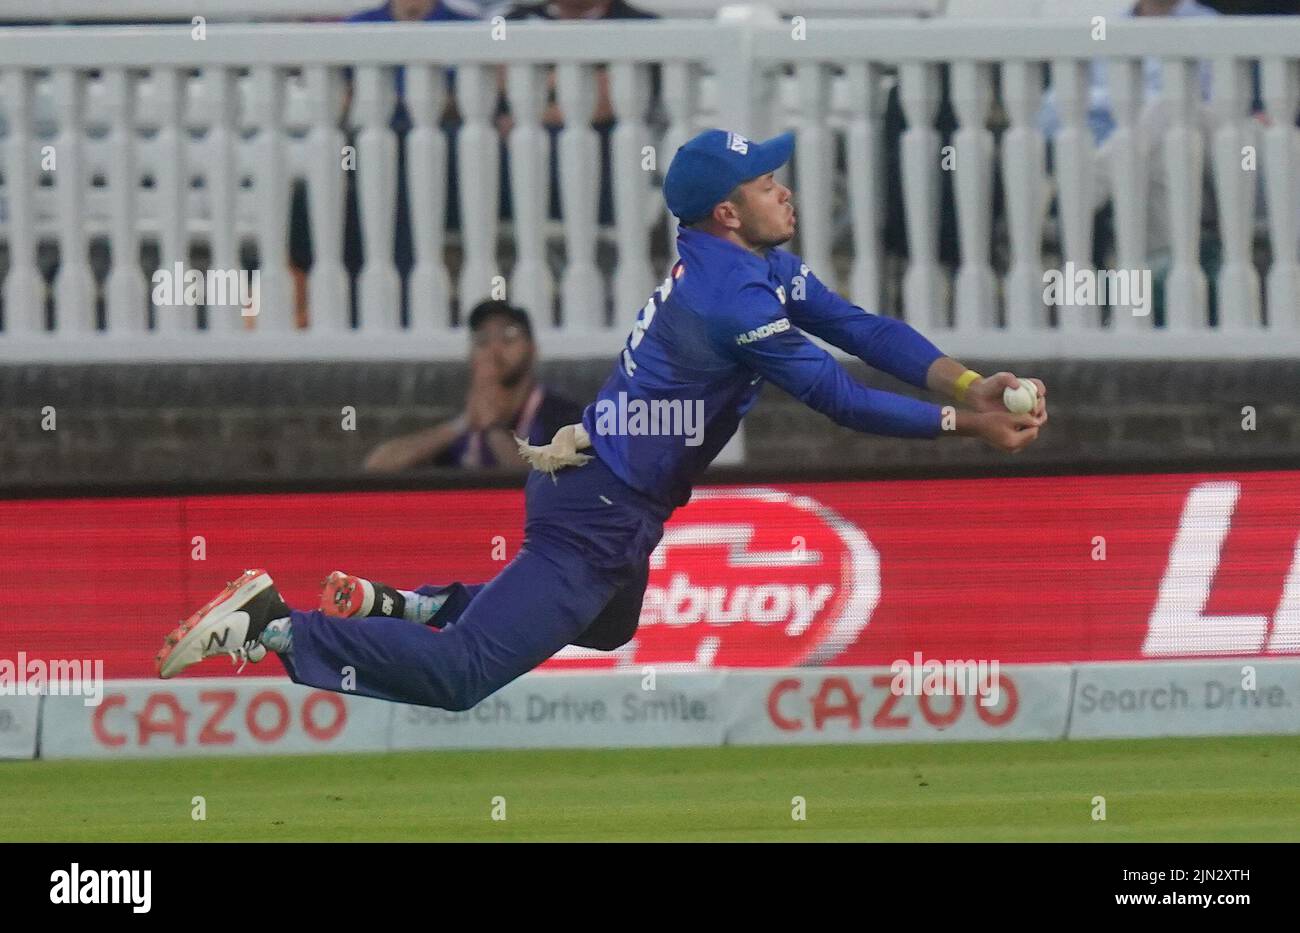 London Spirit's Mason Crane takes a catch of Manchester Original's Jos Buttler during The Hundred match at Lord's, London. Picture date: Monday August 8, 2022. Stock Photo